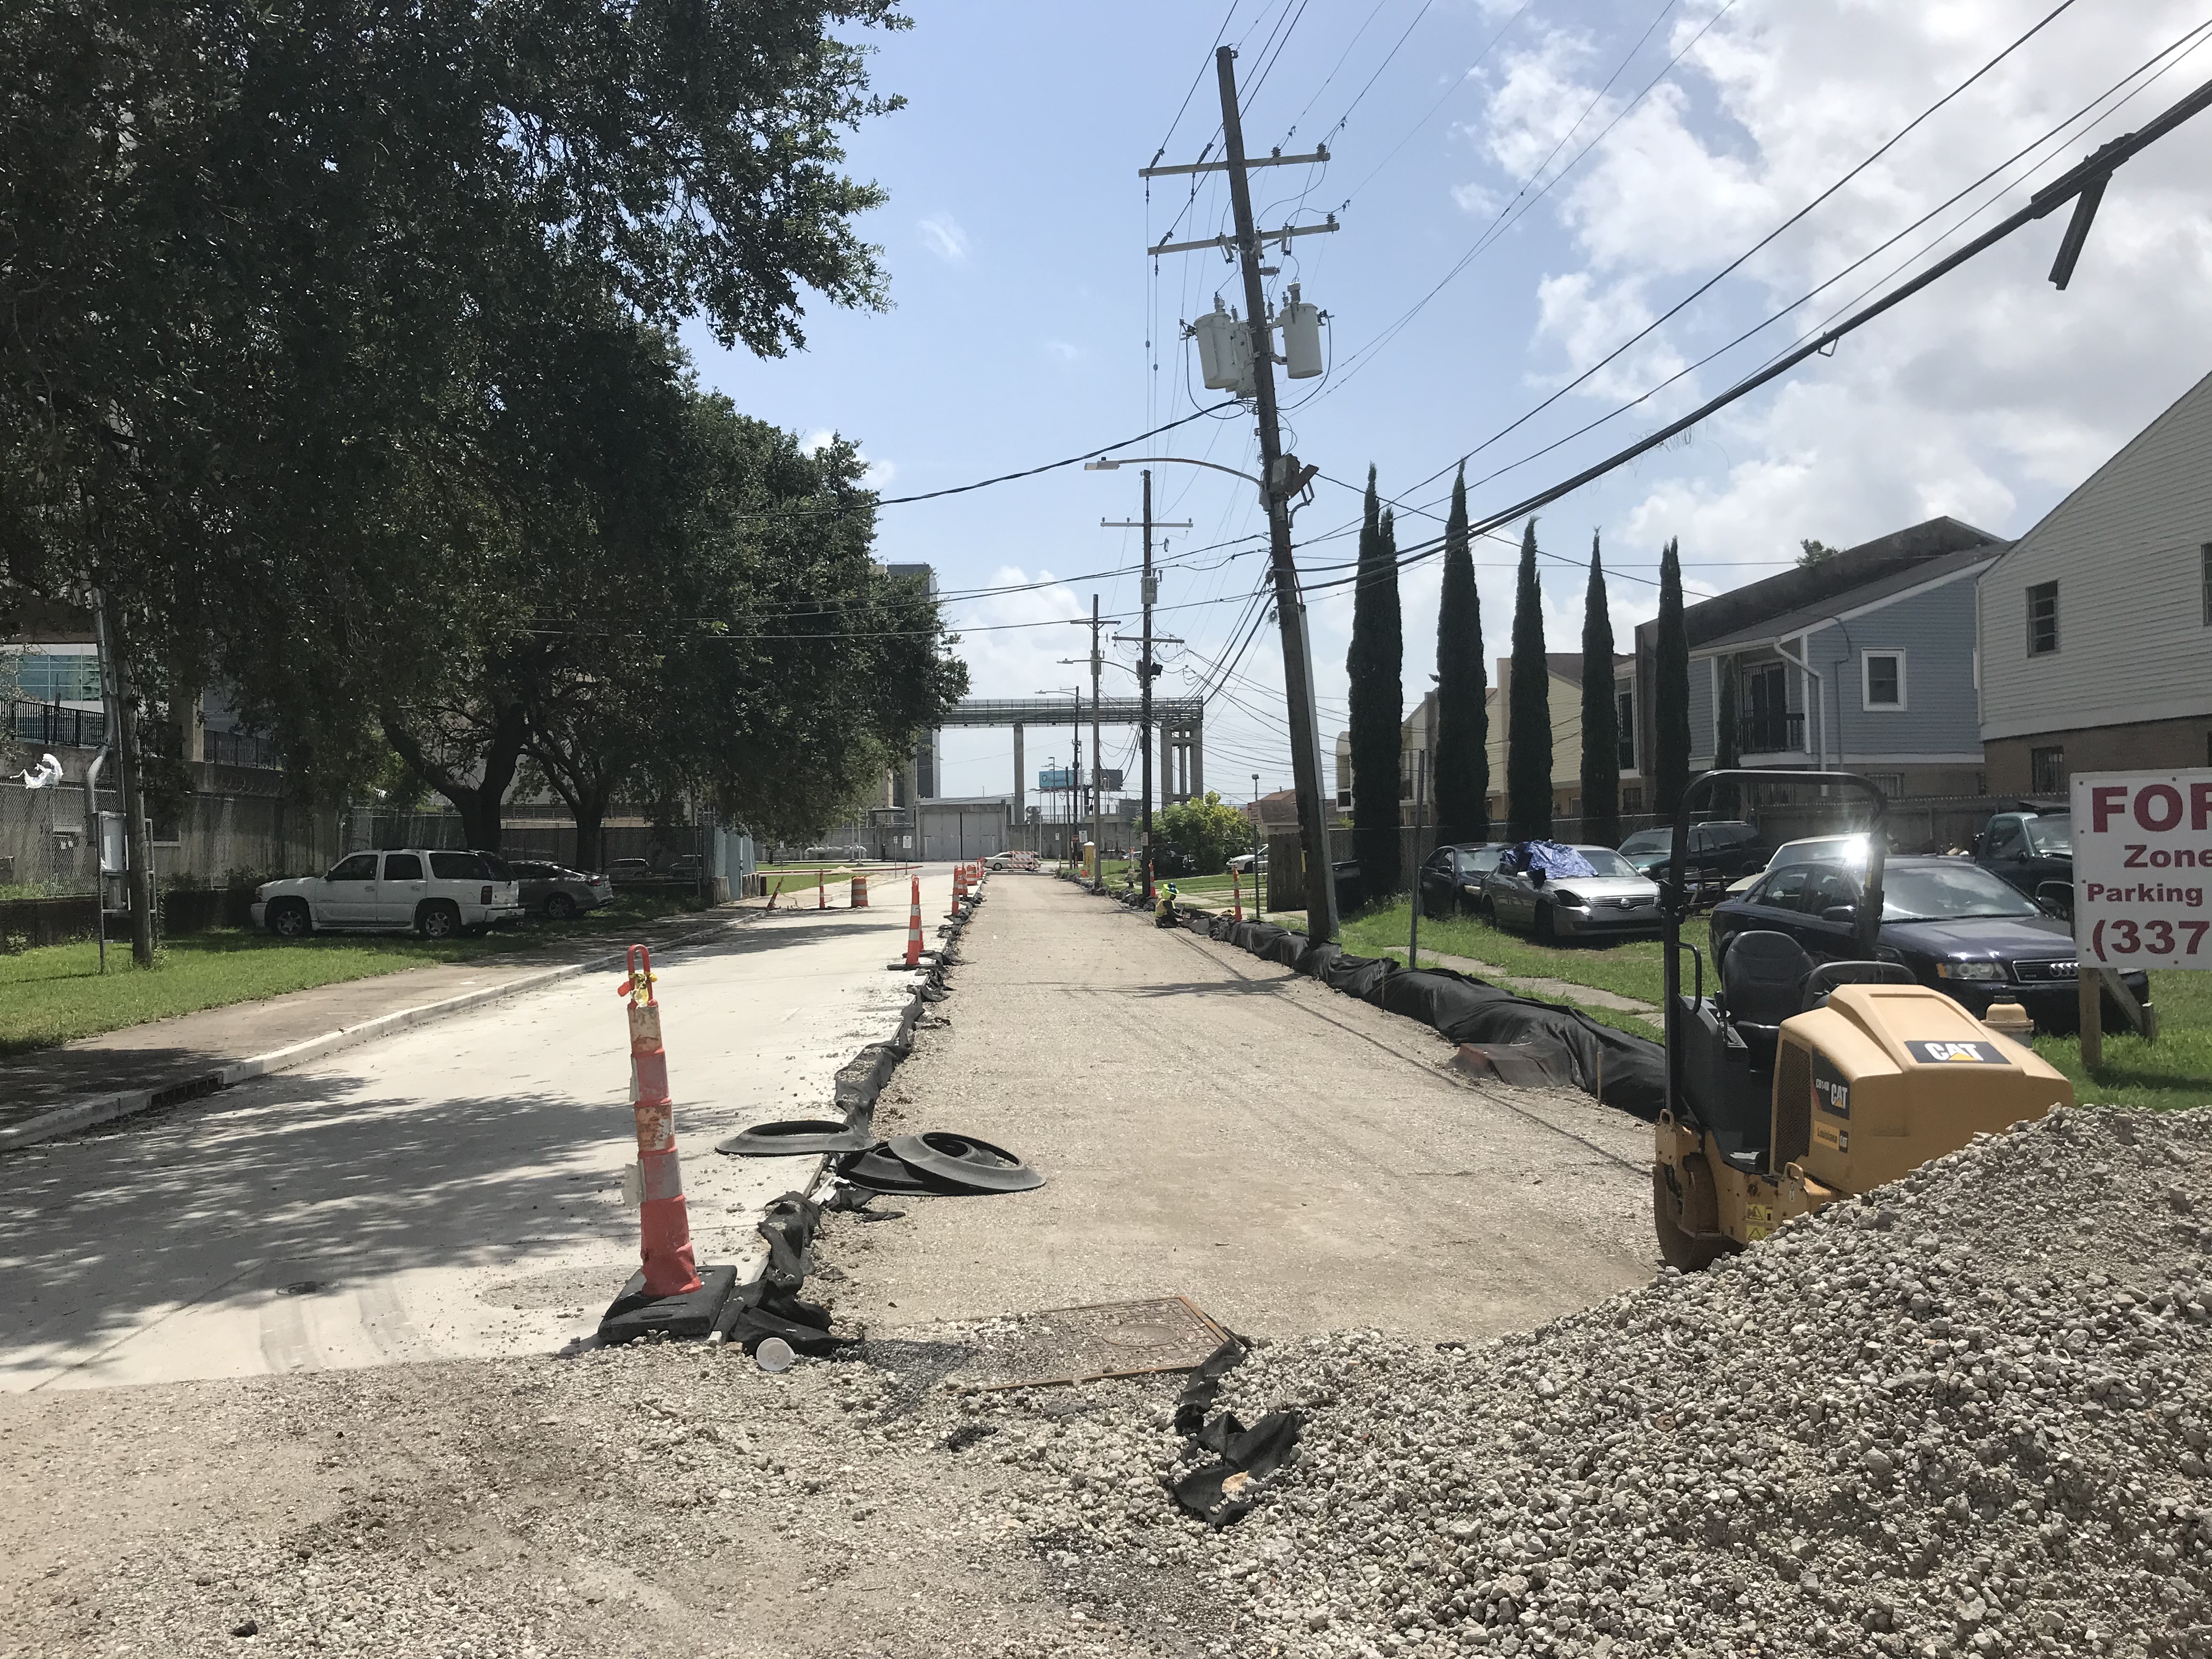 NEW SCOPE ADDED TO MID-CITY GROUP A PROJECT PUSHING COMPLETION UNTIL WINTER 2020 / 2021